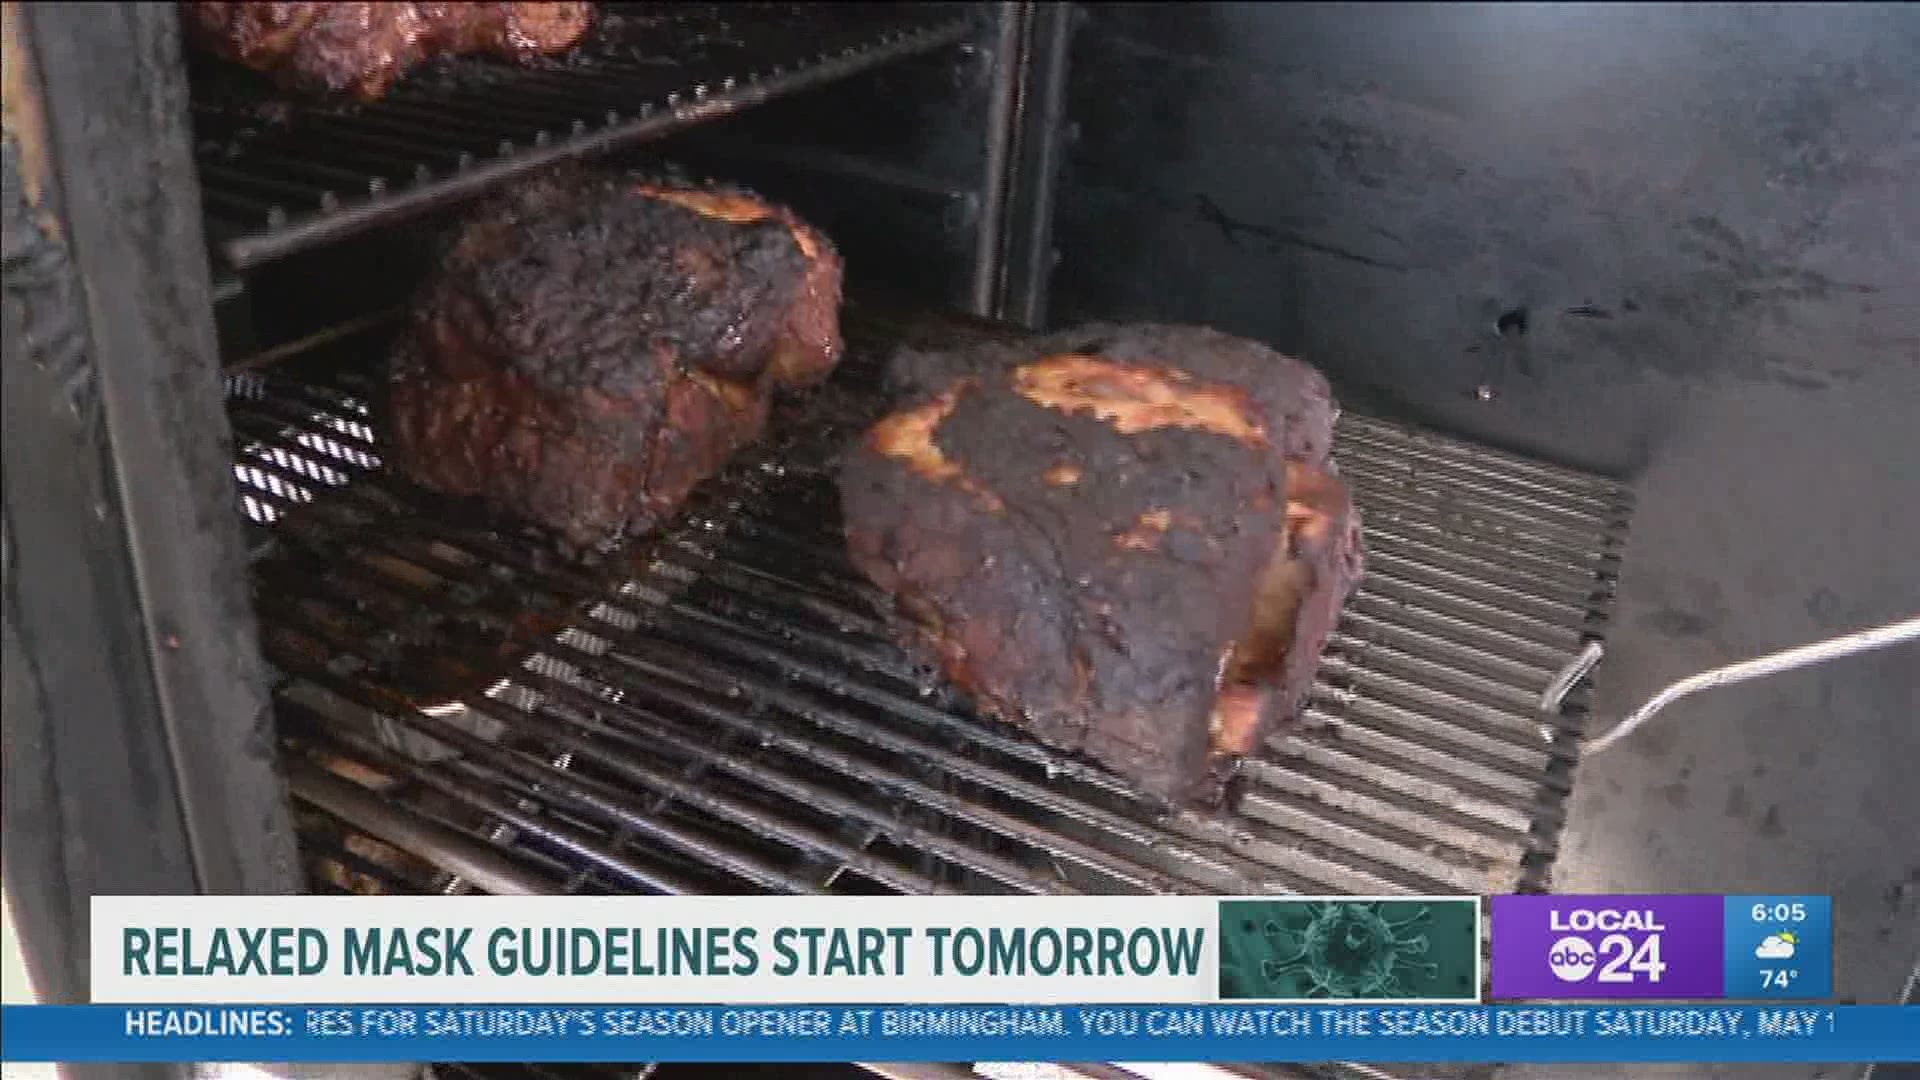 The World Championship Barbecue Cooking Contest came against backdrop of severely reduced mask guidelines from CDC and Shelby County.